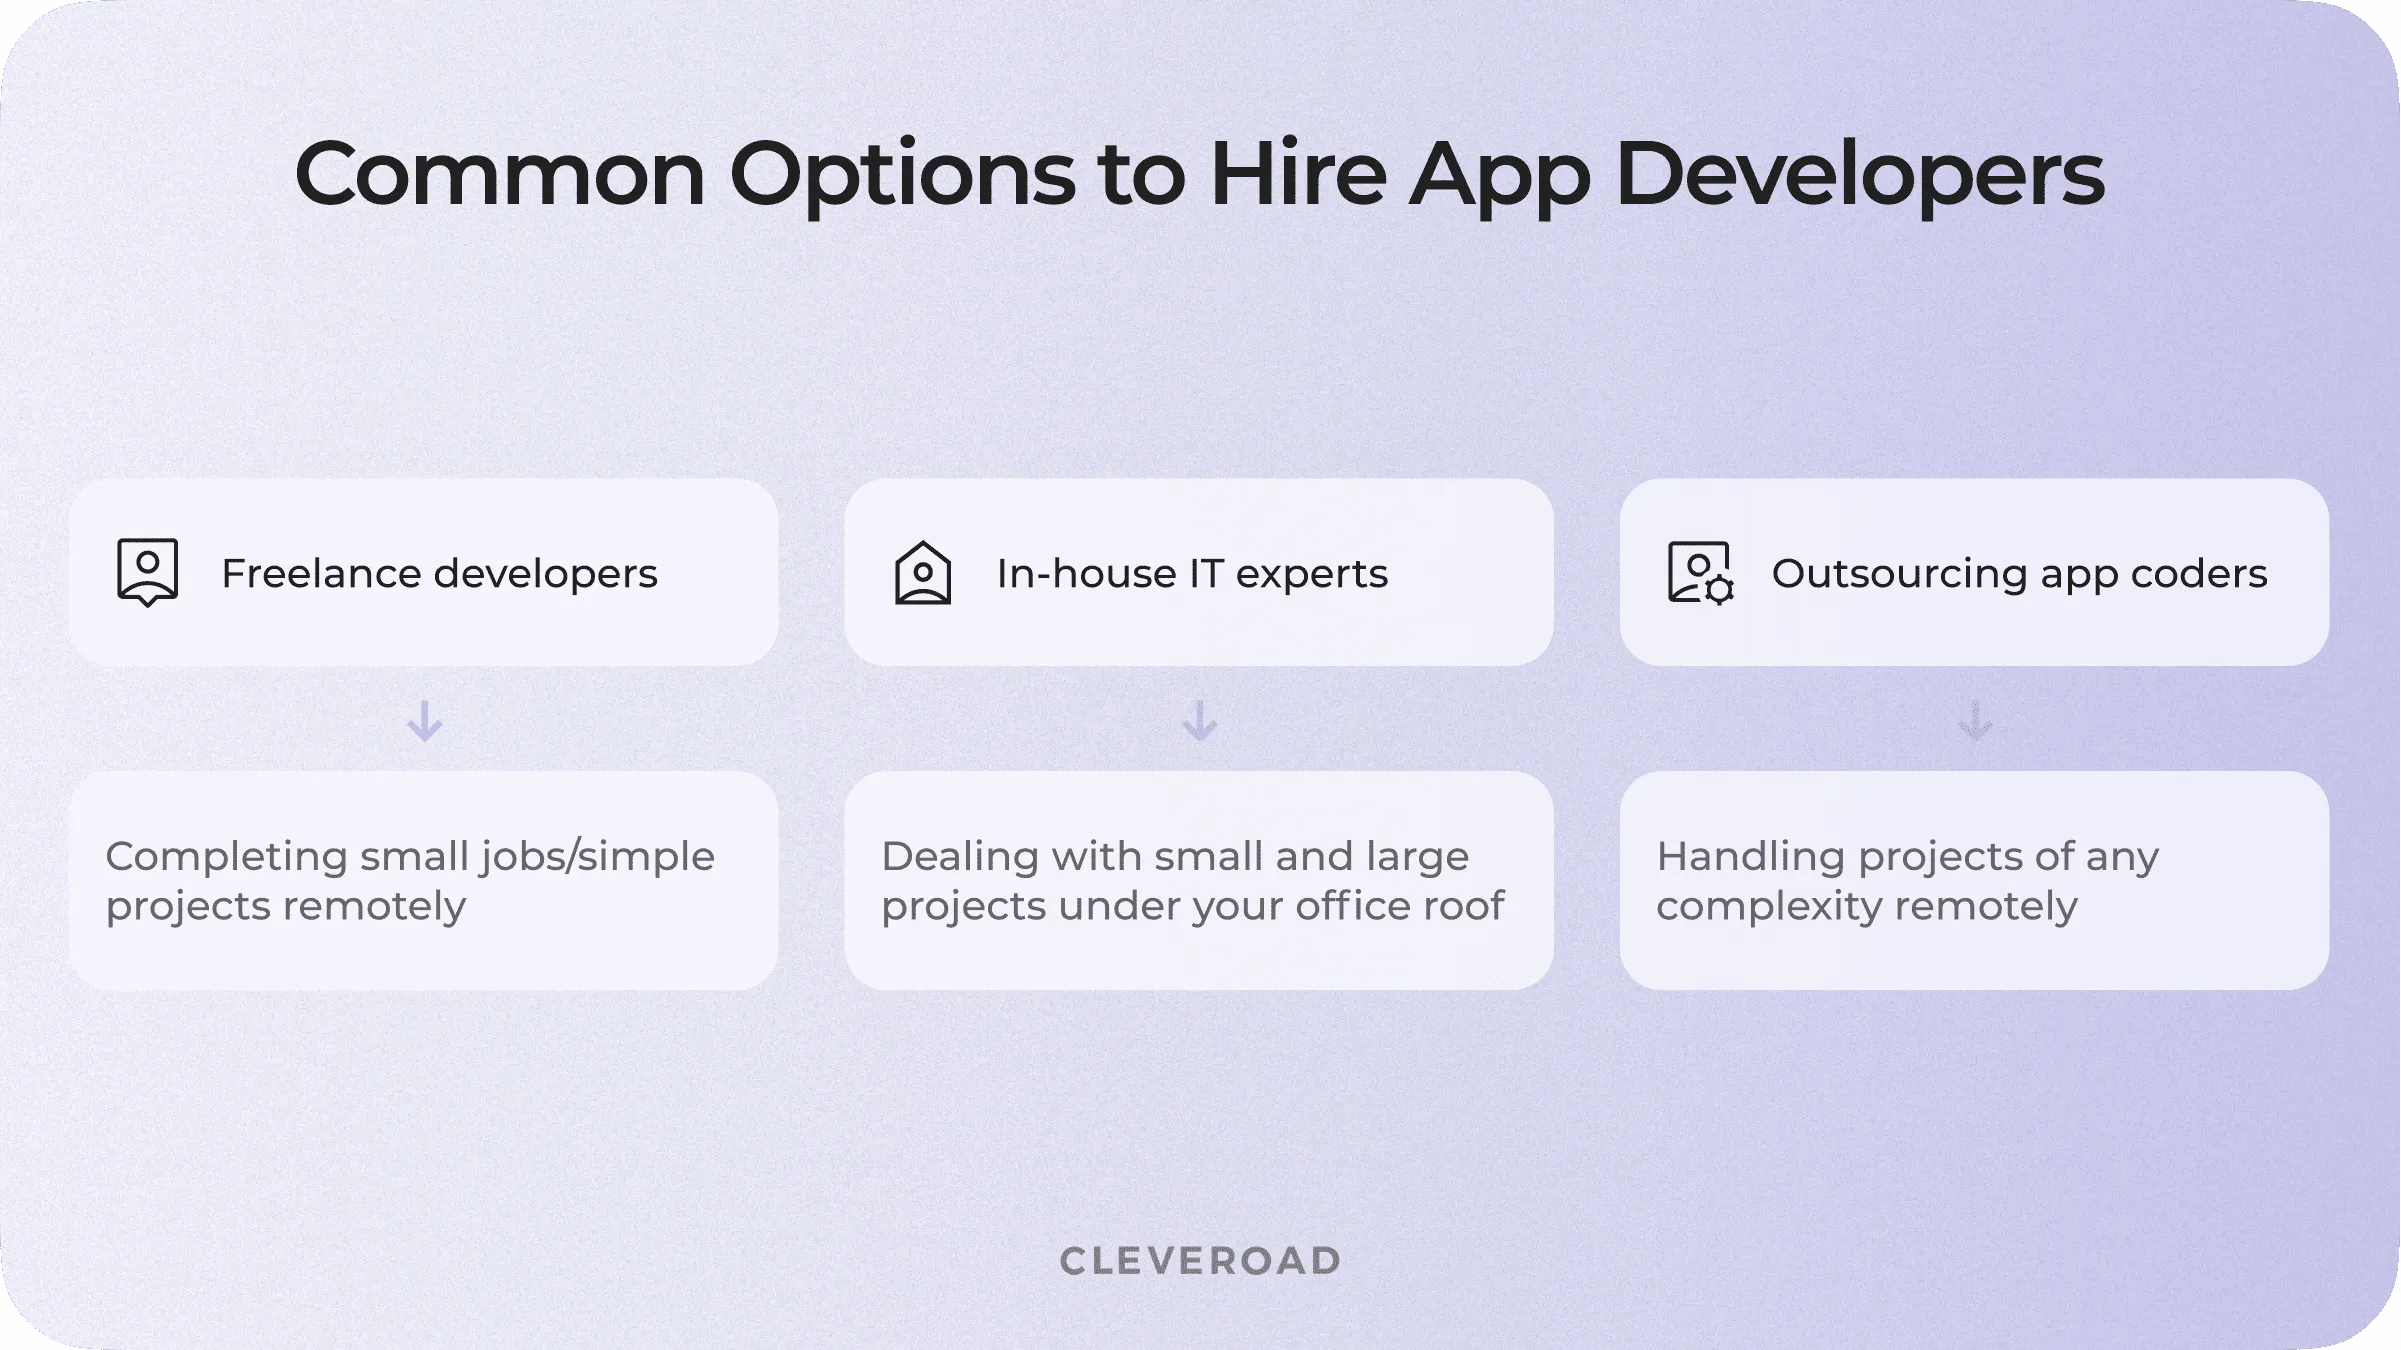 Common hiring options to use when you need an app developer